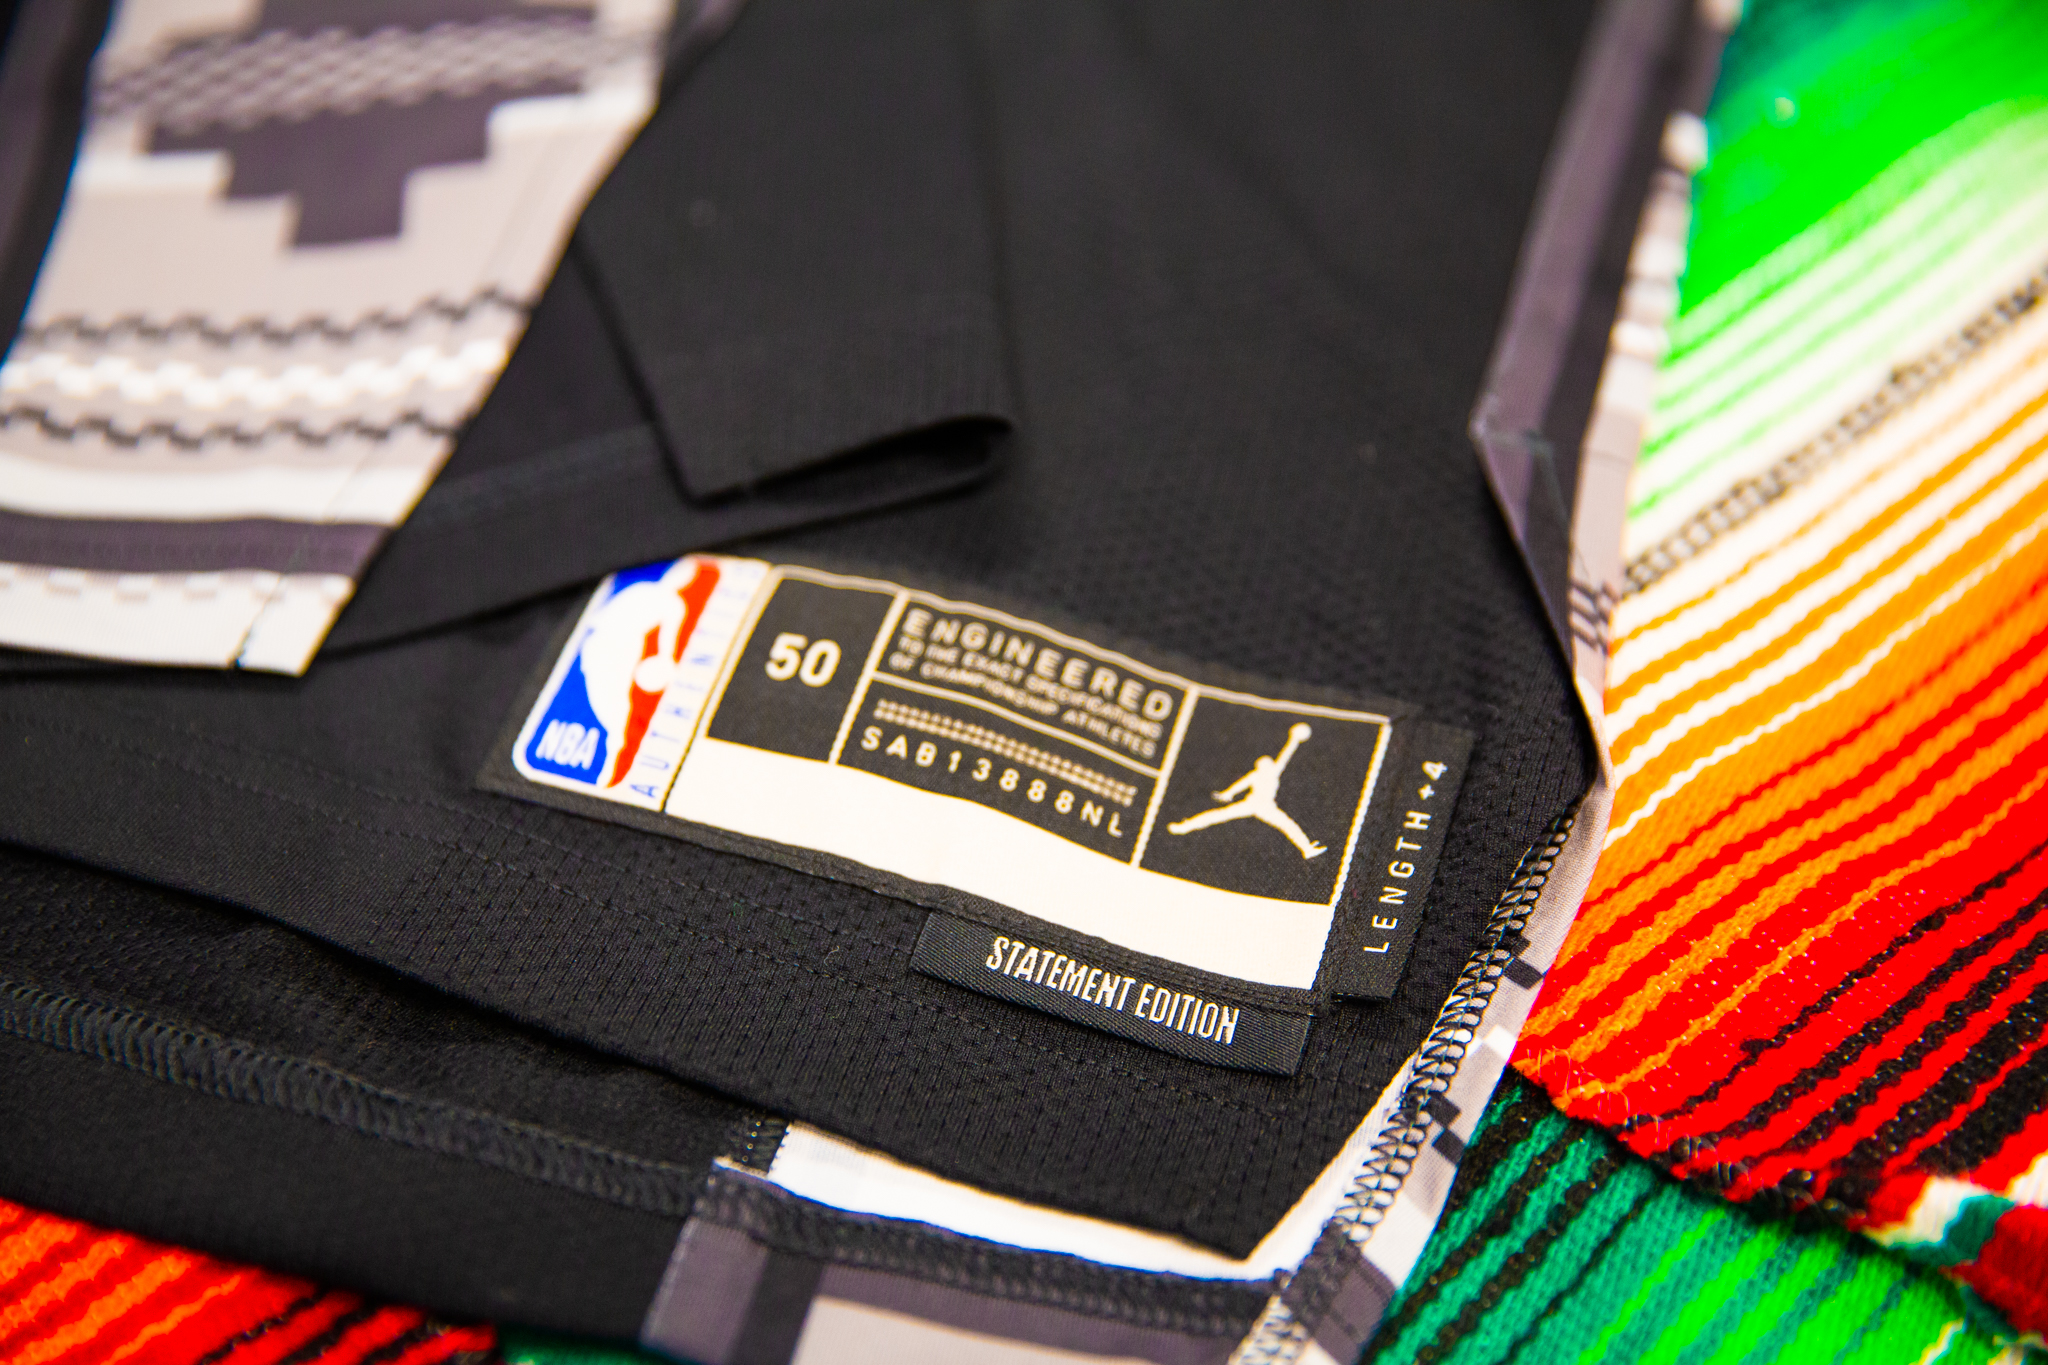 Spurs sleeved jerseys are coming to an end